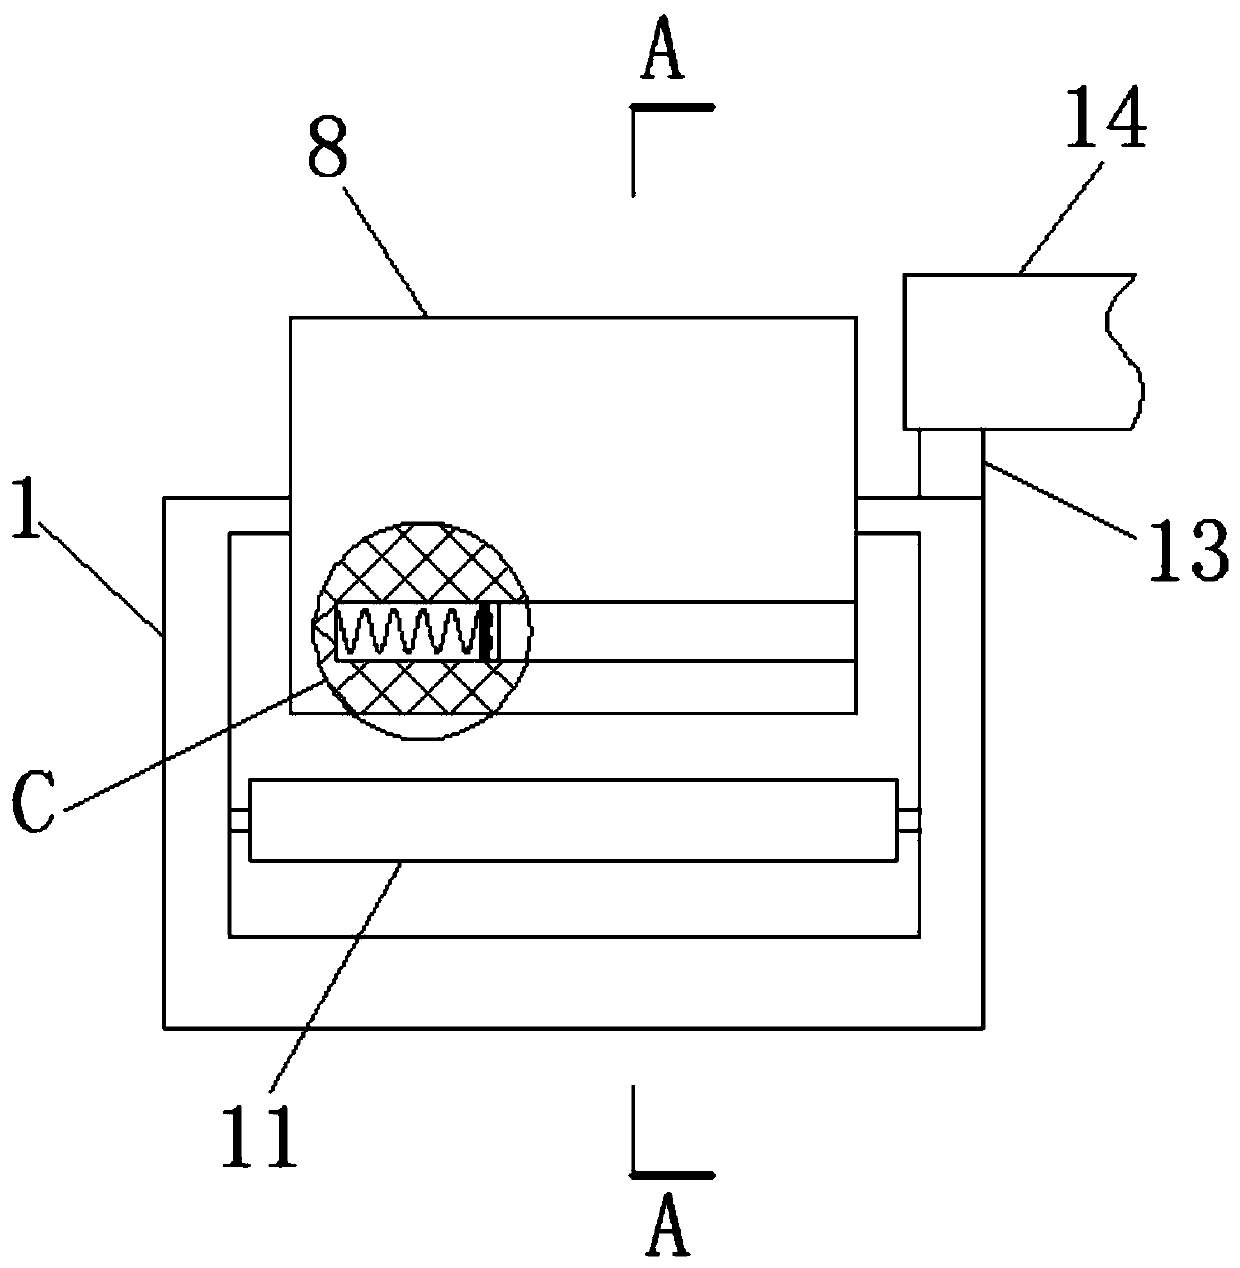 Flow production detection device capable of rapidly screening LED lamps